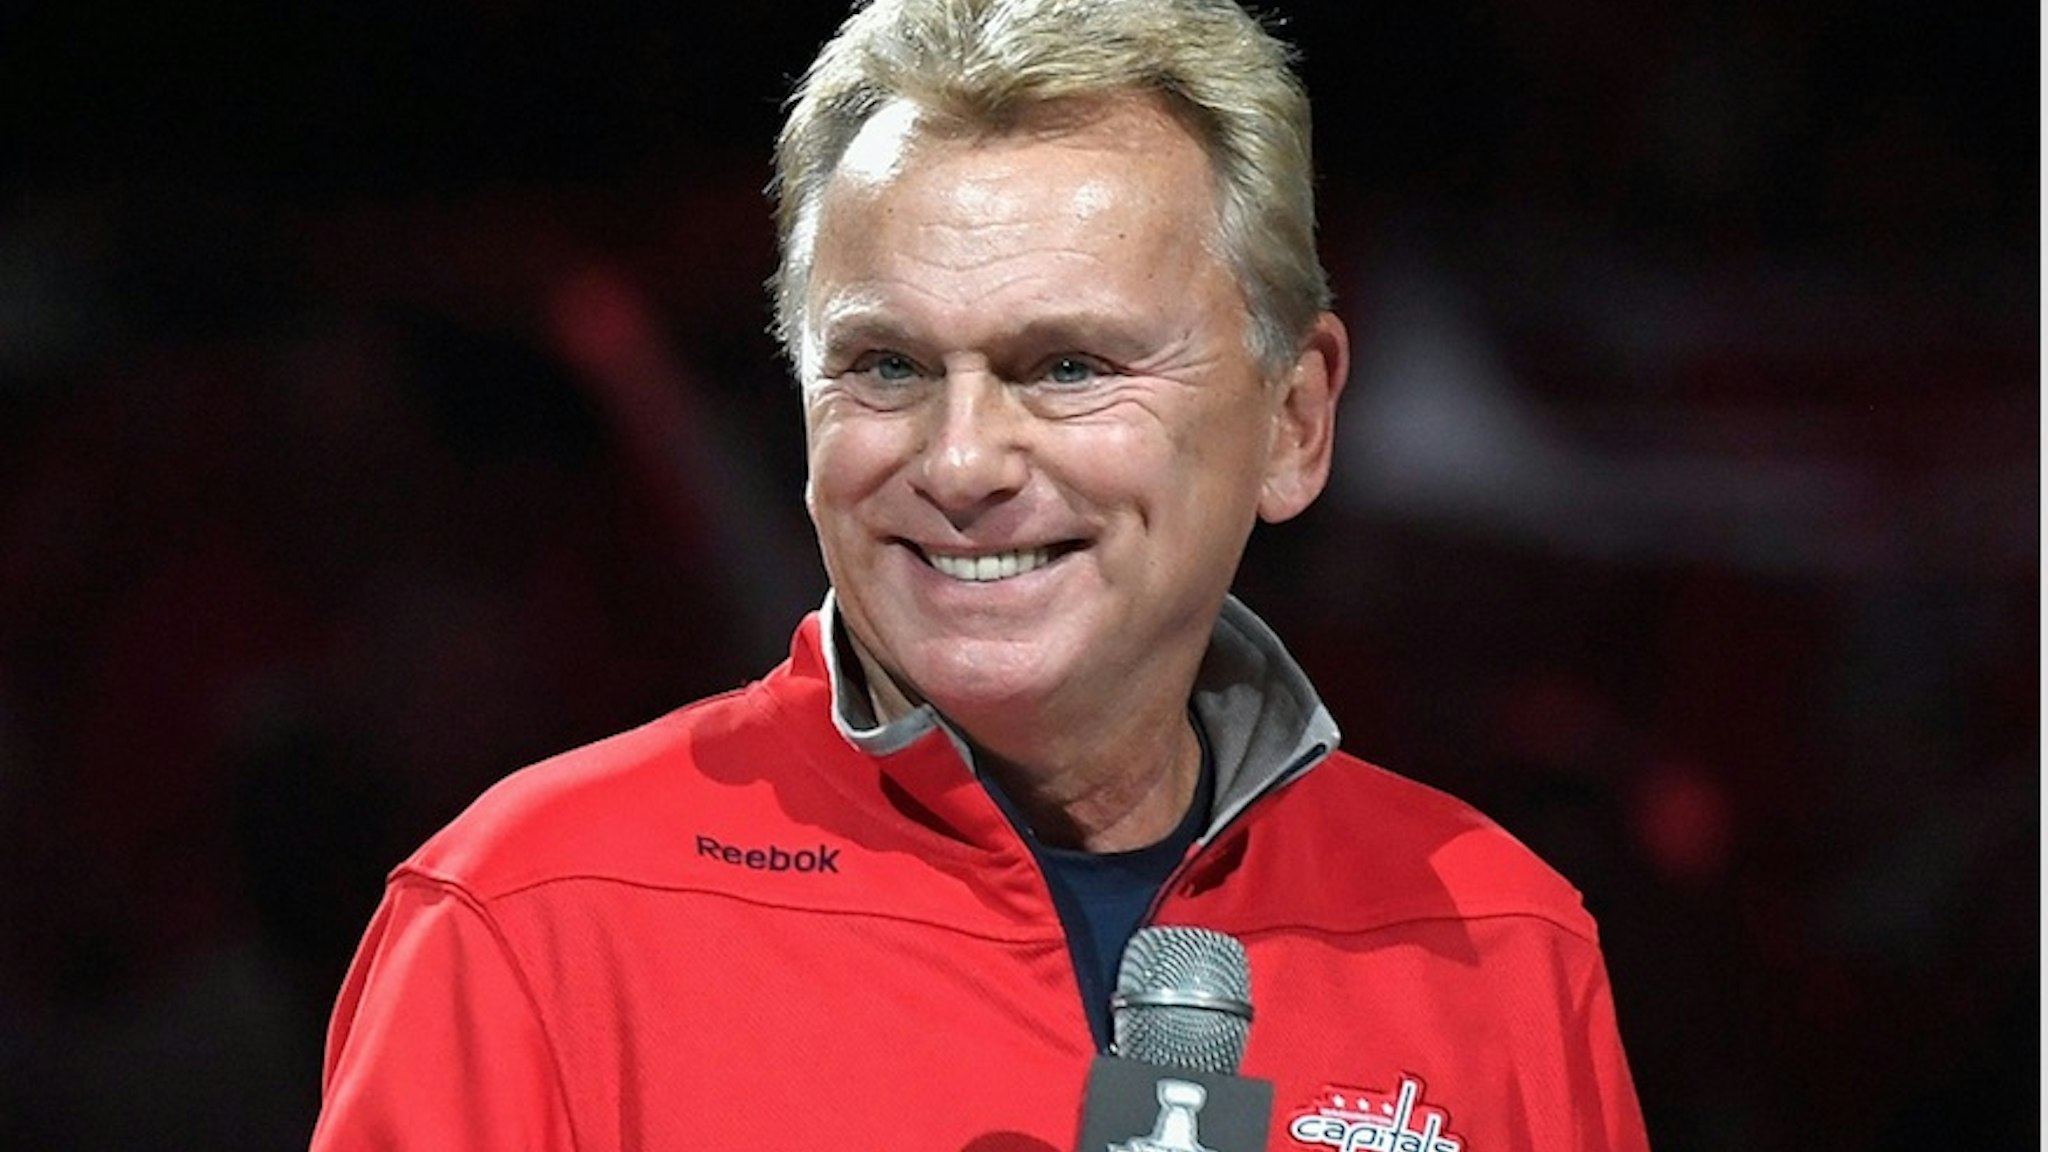 American television personality Pat Sajak makes the team introductions before Game Three of the 2018 NHL Stanley Cup Final between the Vegas Golden Knights and the Washington Capitals at Capital One Arena on June 2, 2018 in Washington, DC. s)